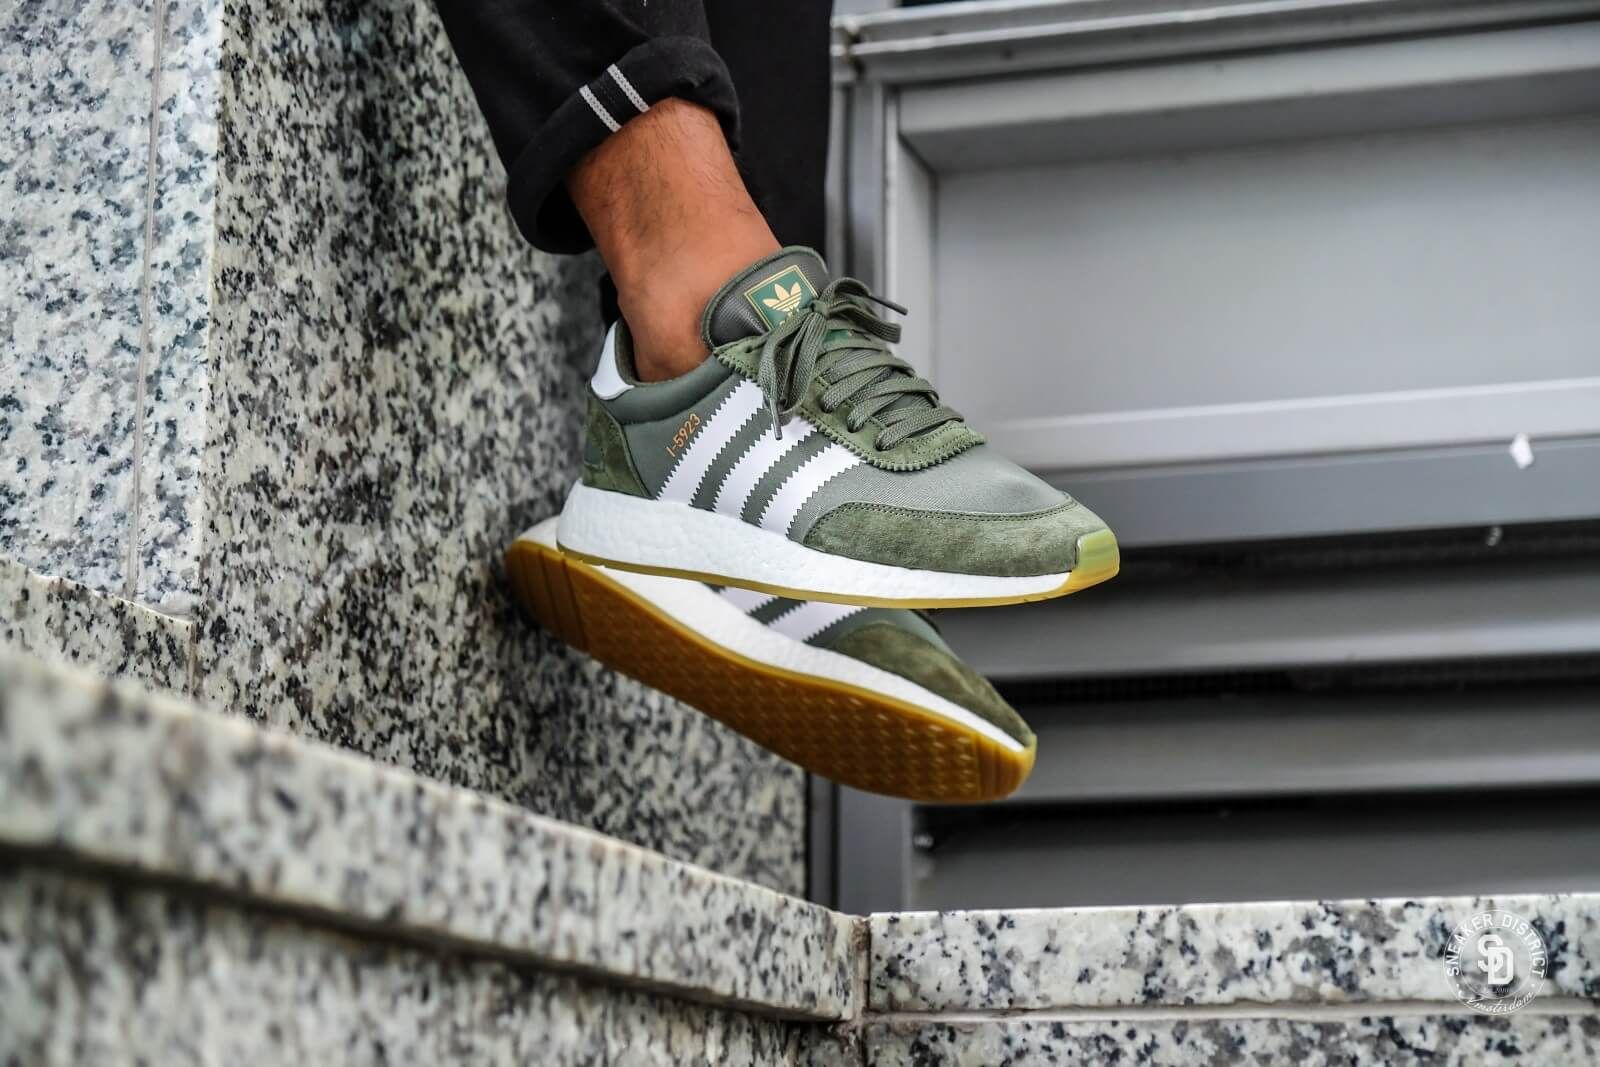 Kicks Under Cost on Twitter: "The "Base Green" #adidas Iniki Boost is on  sale for $59, retail $120 Click here to order -&gt; https://t.co/h5pH01J3Cp  https://t.co/vQXDYPpI30" / Twitter